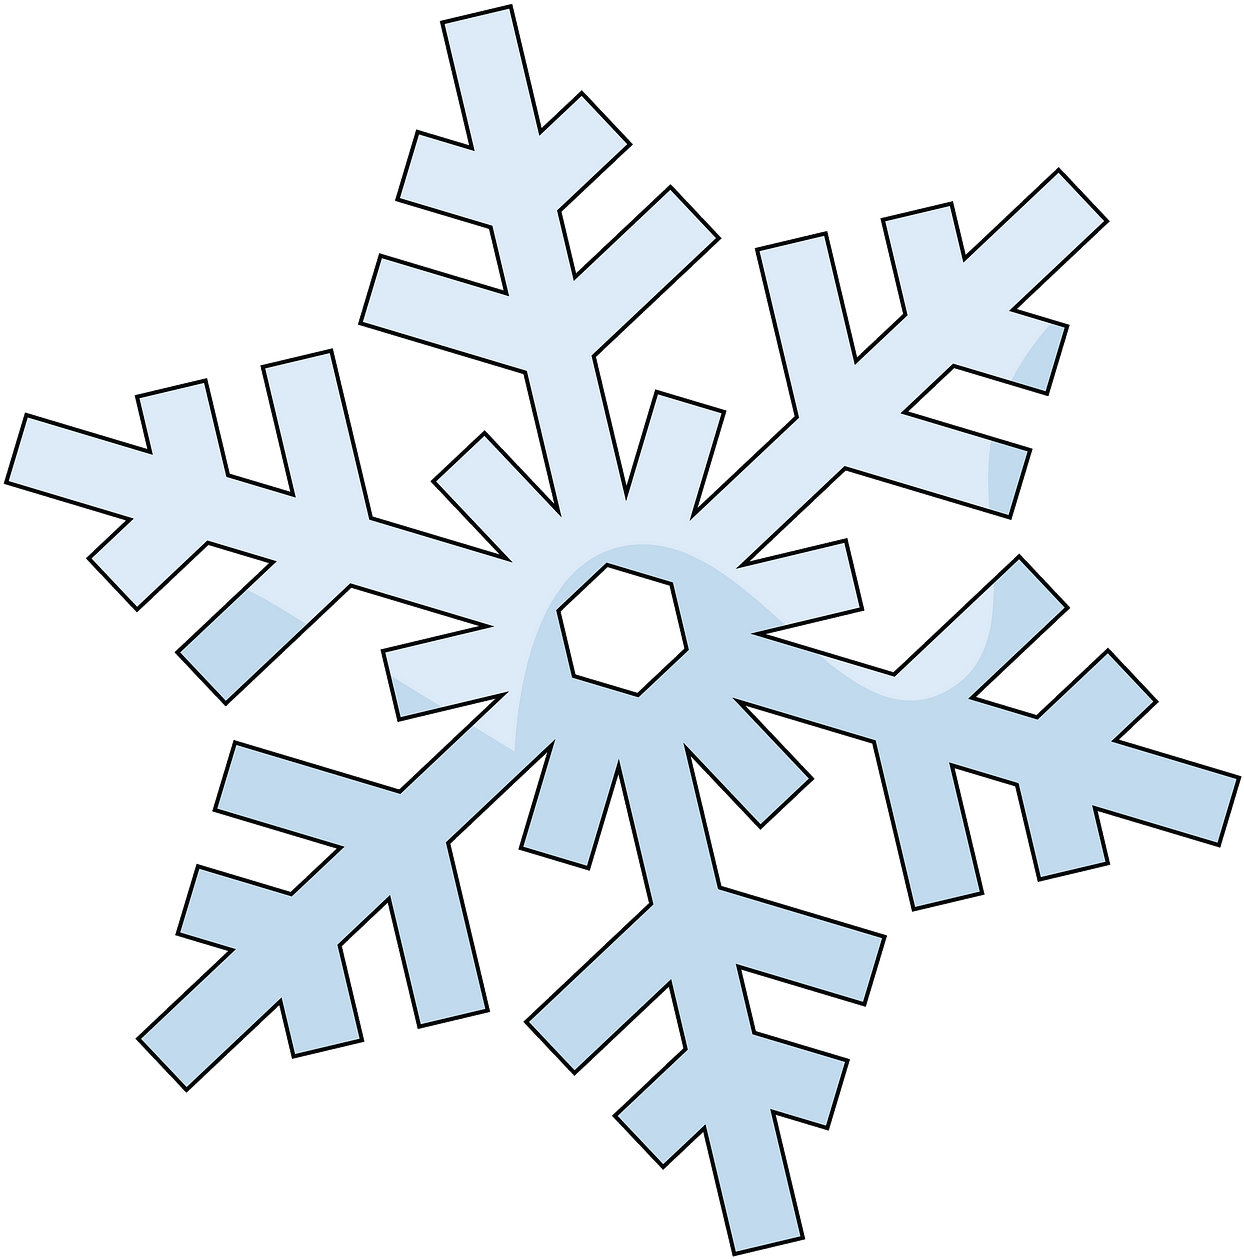 Stylized Snowflake Graphic PNG image